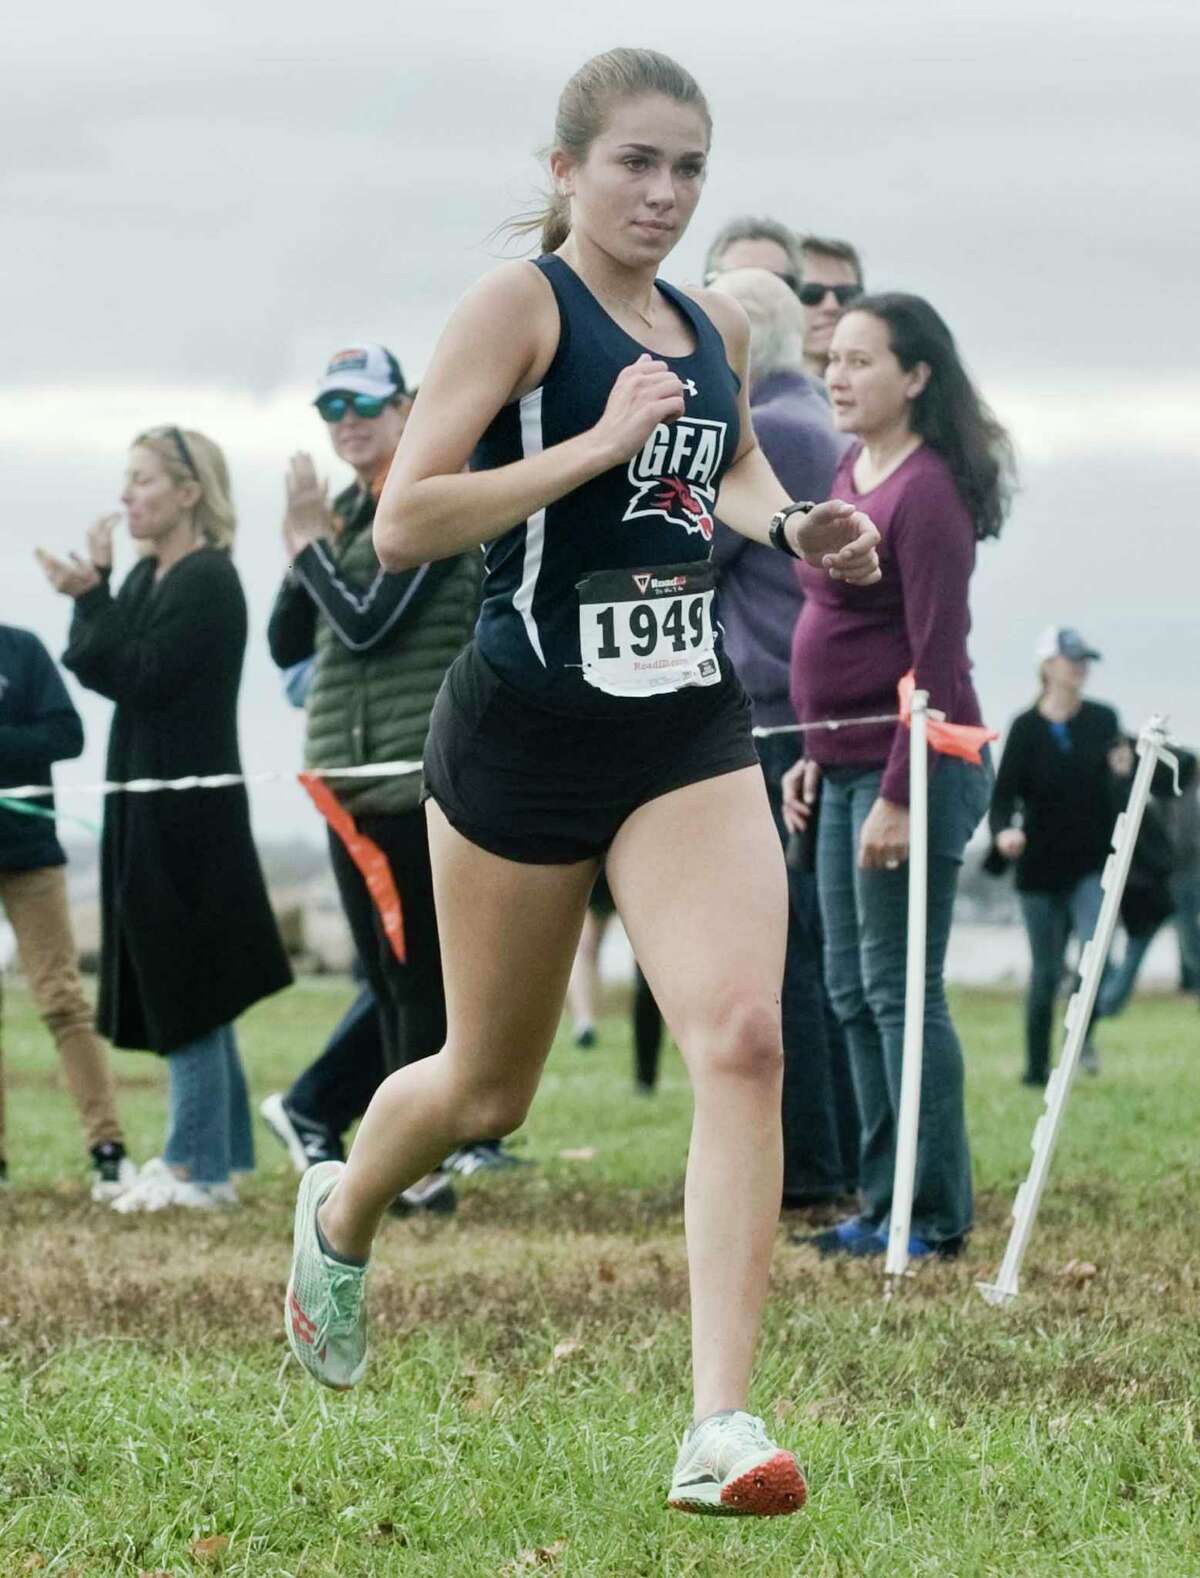 Caroline McCall, of Greens Farms Academy, finished third in the FAA Country Championships at Sherwood Island in Westport on Monday.